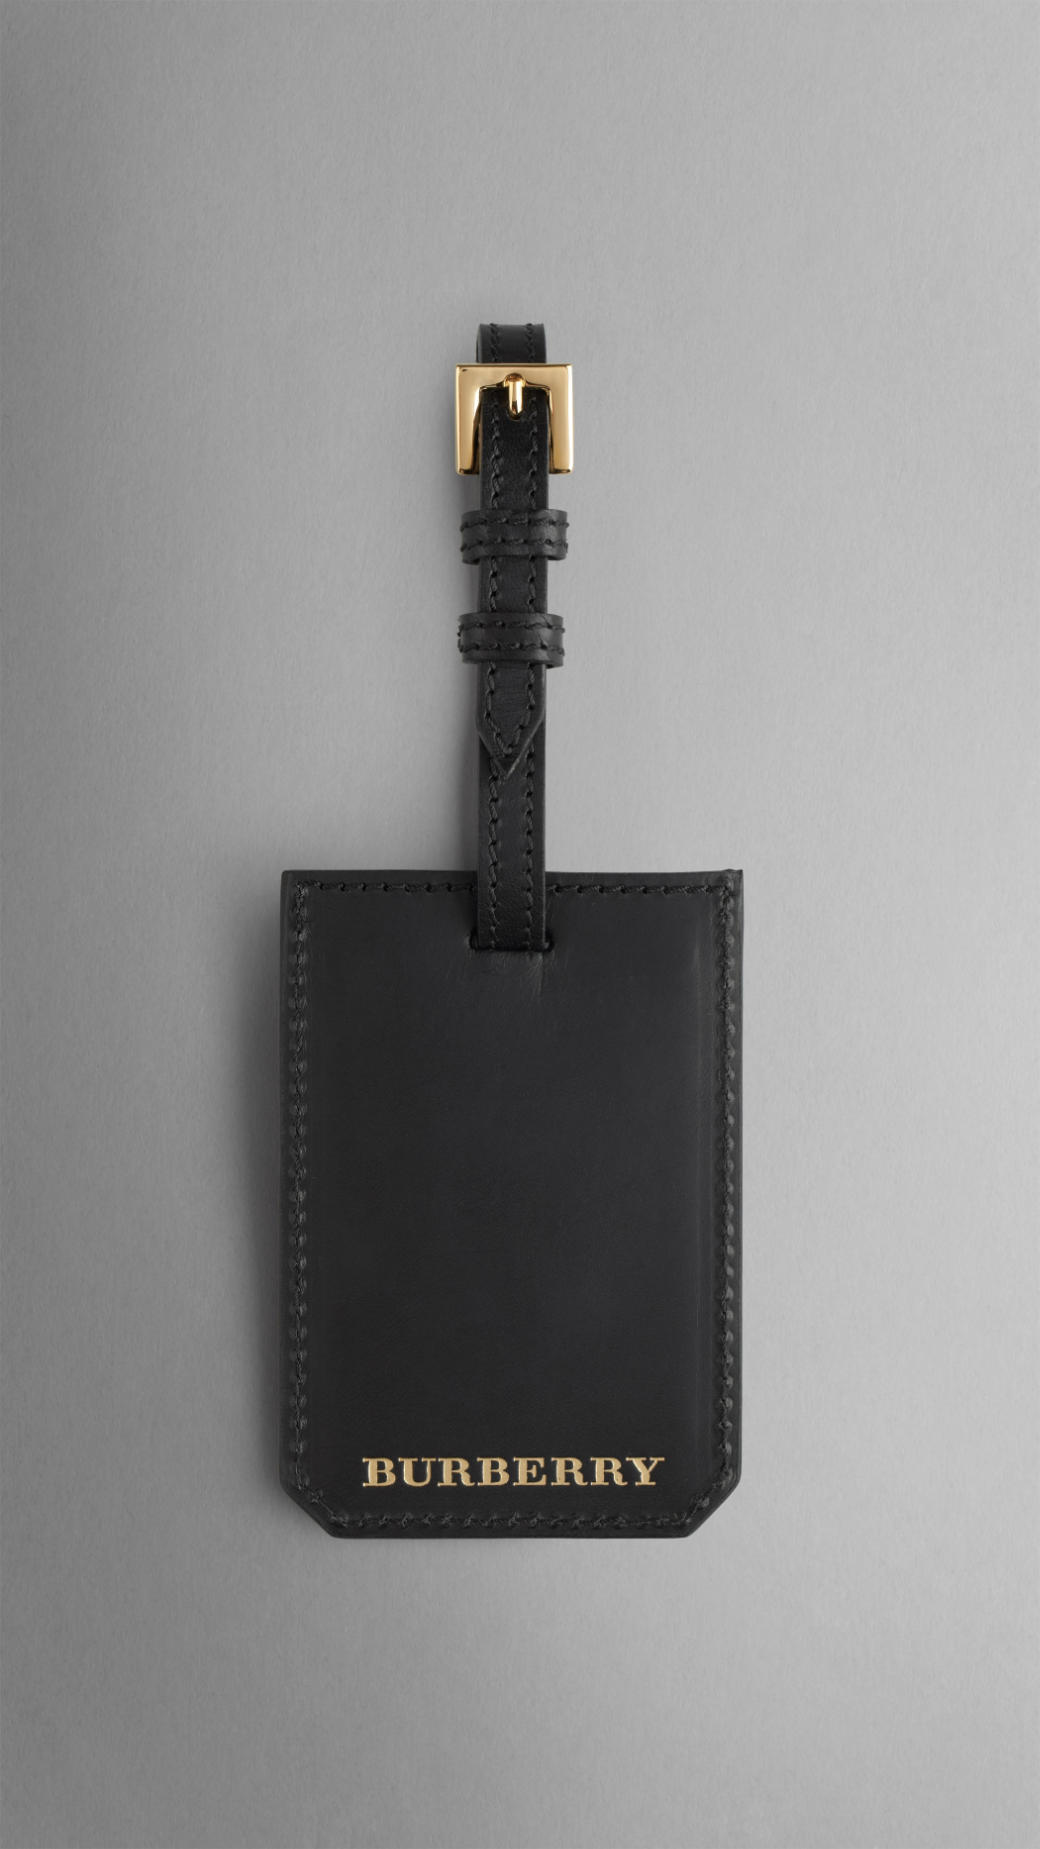 Burberry Leather Luggage Tag in Black 